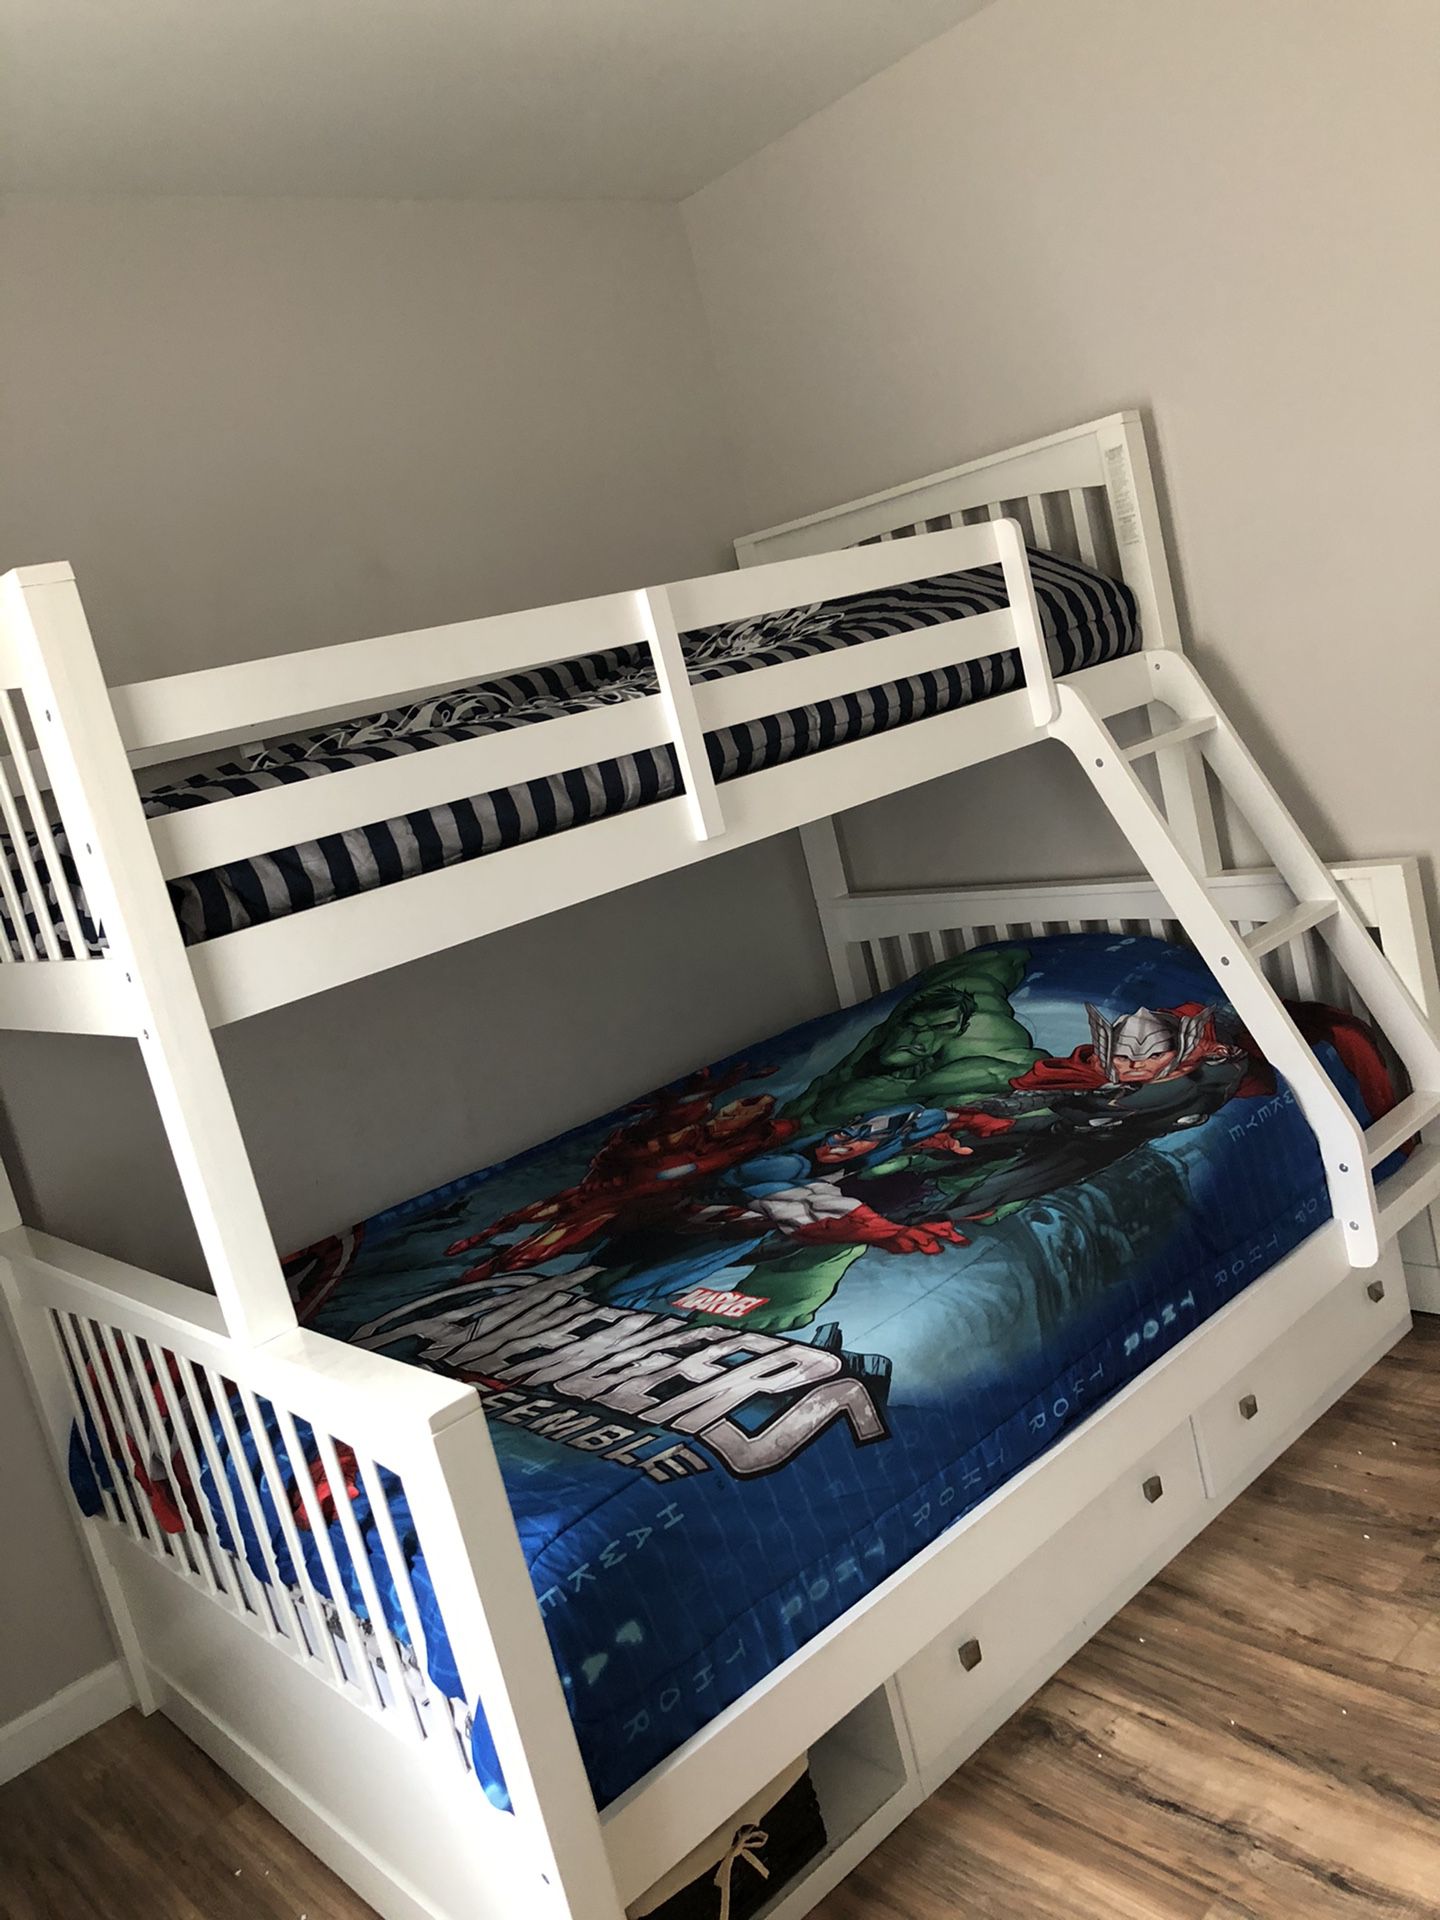 Bunk bed twin bed over full